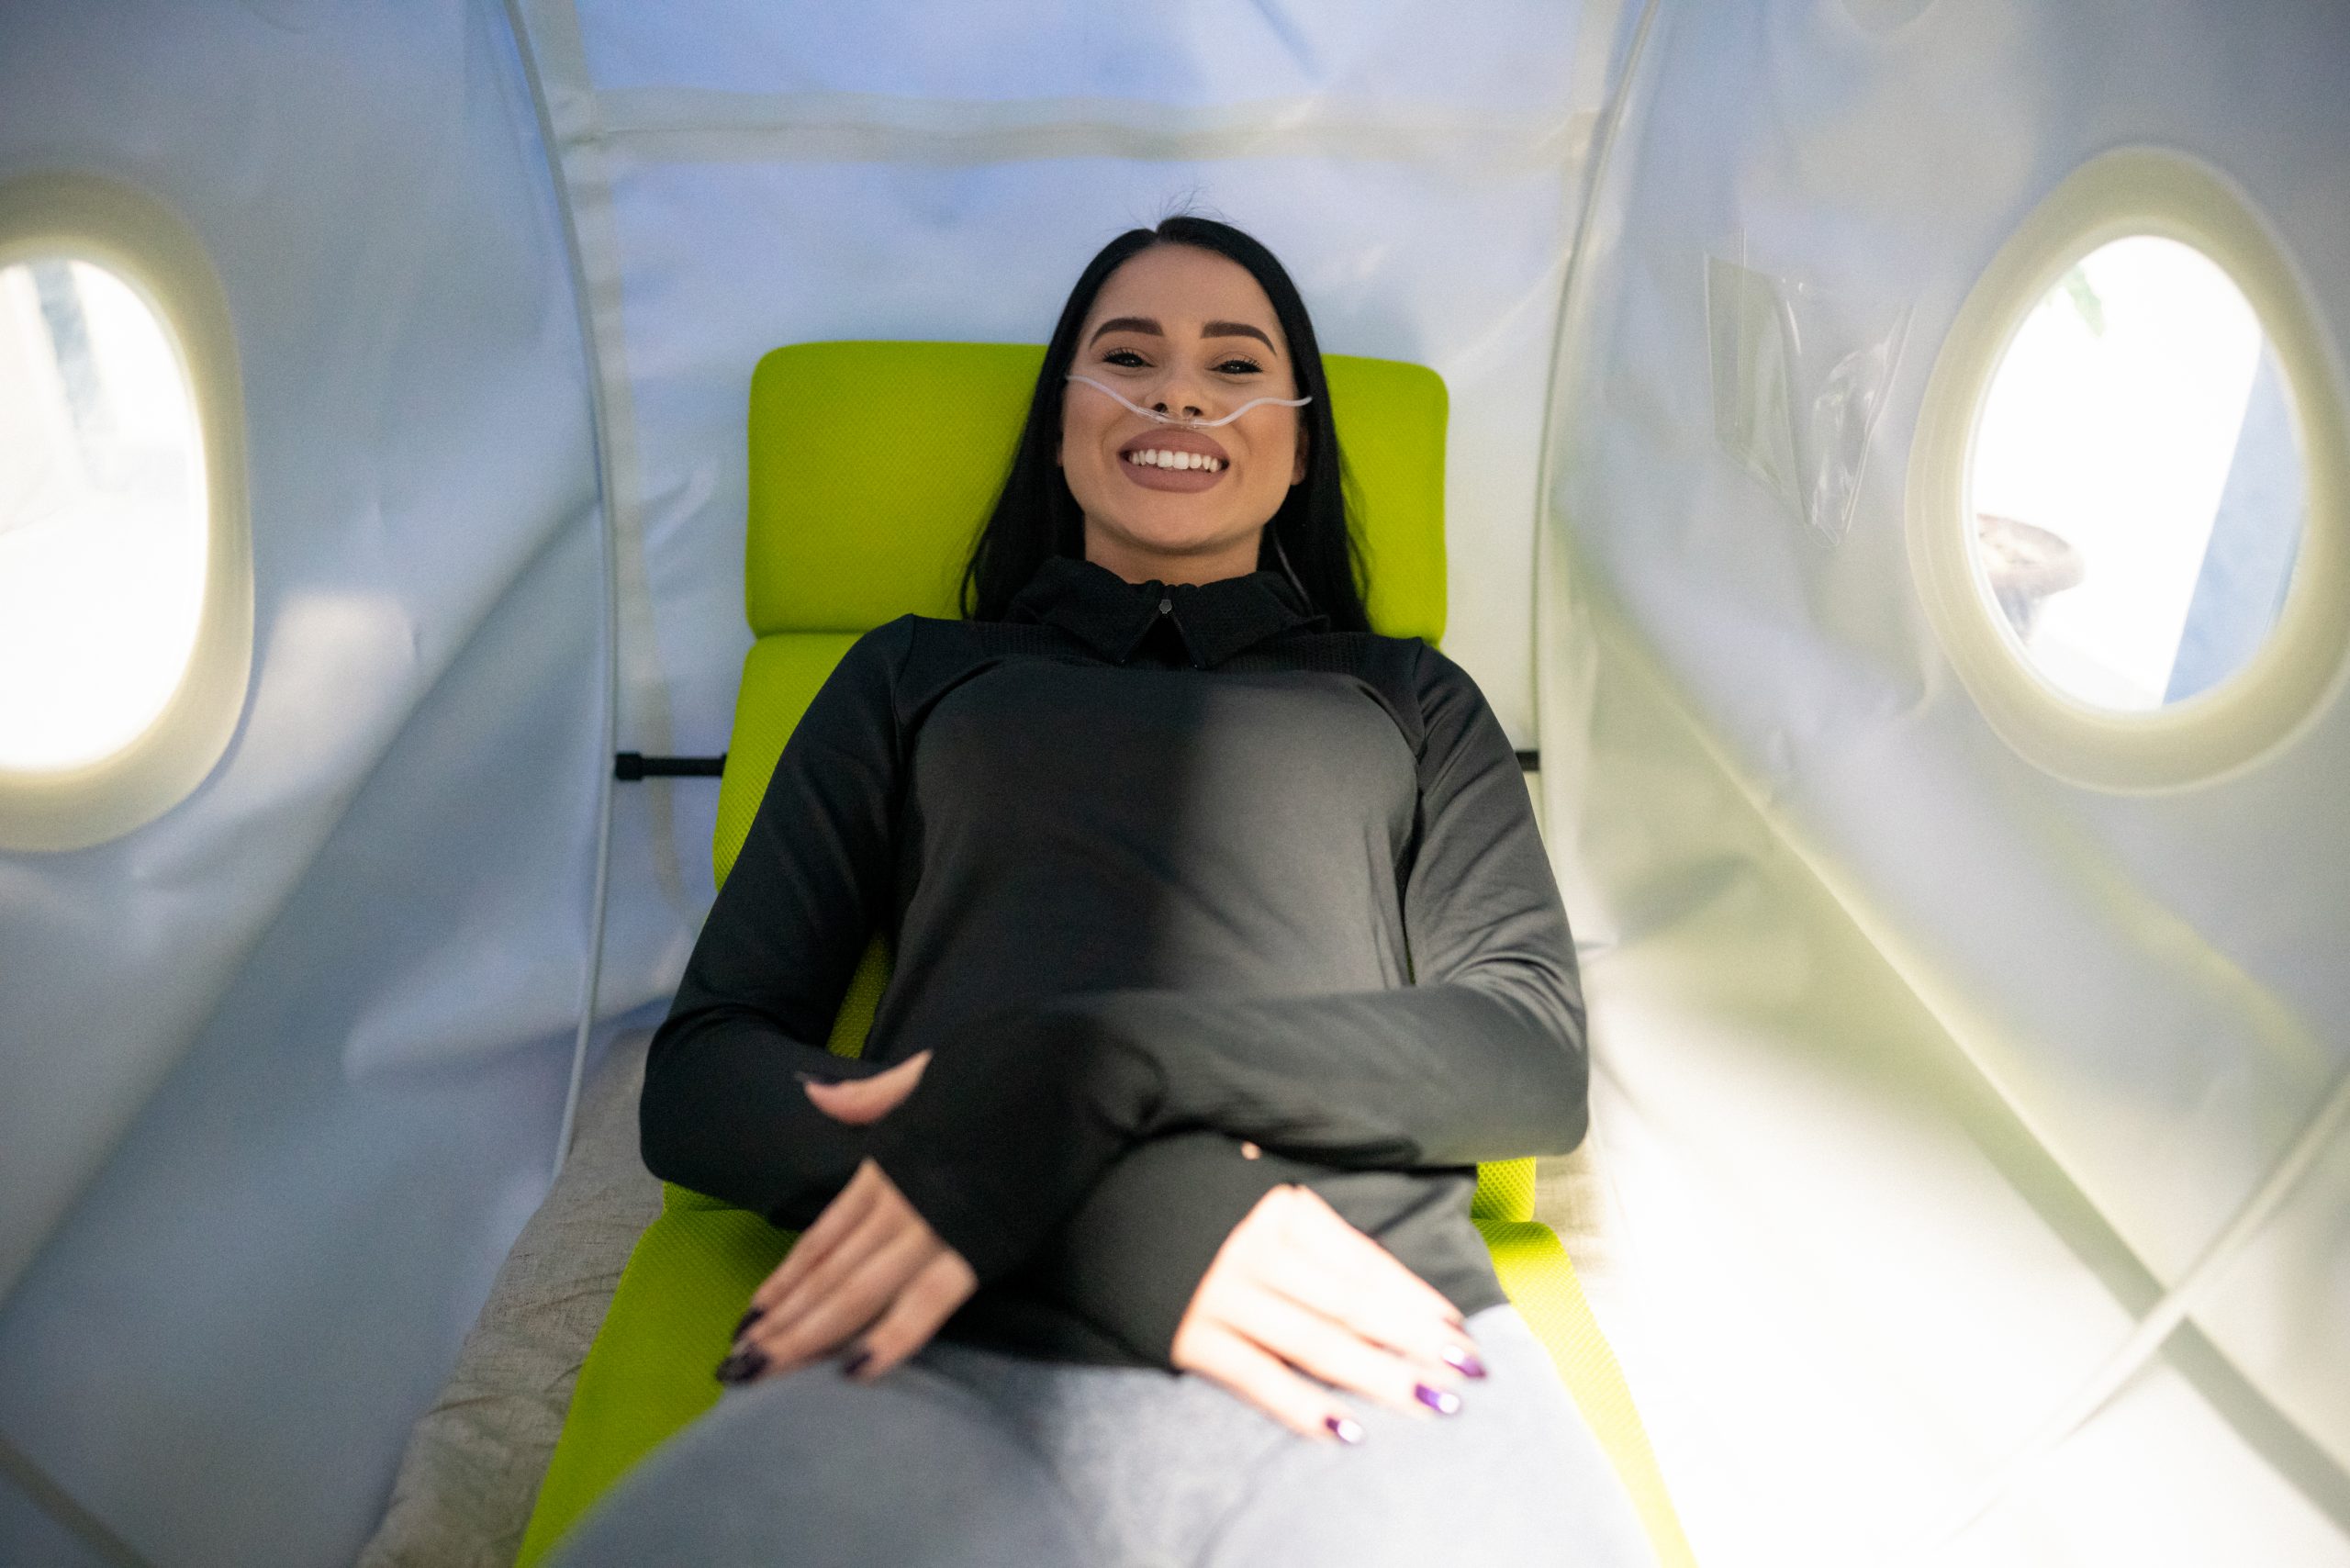 A woman lies comfortably inside a hyperbaric oxygen therapy chamber